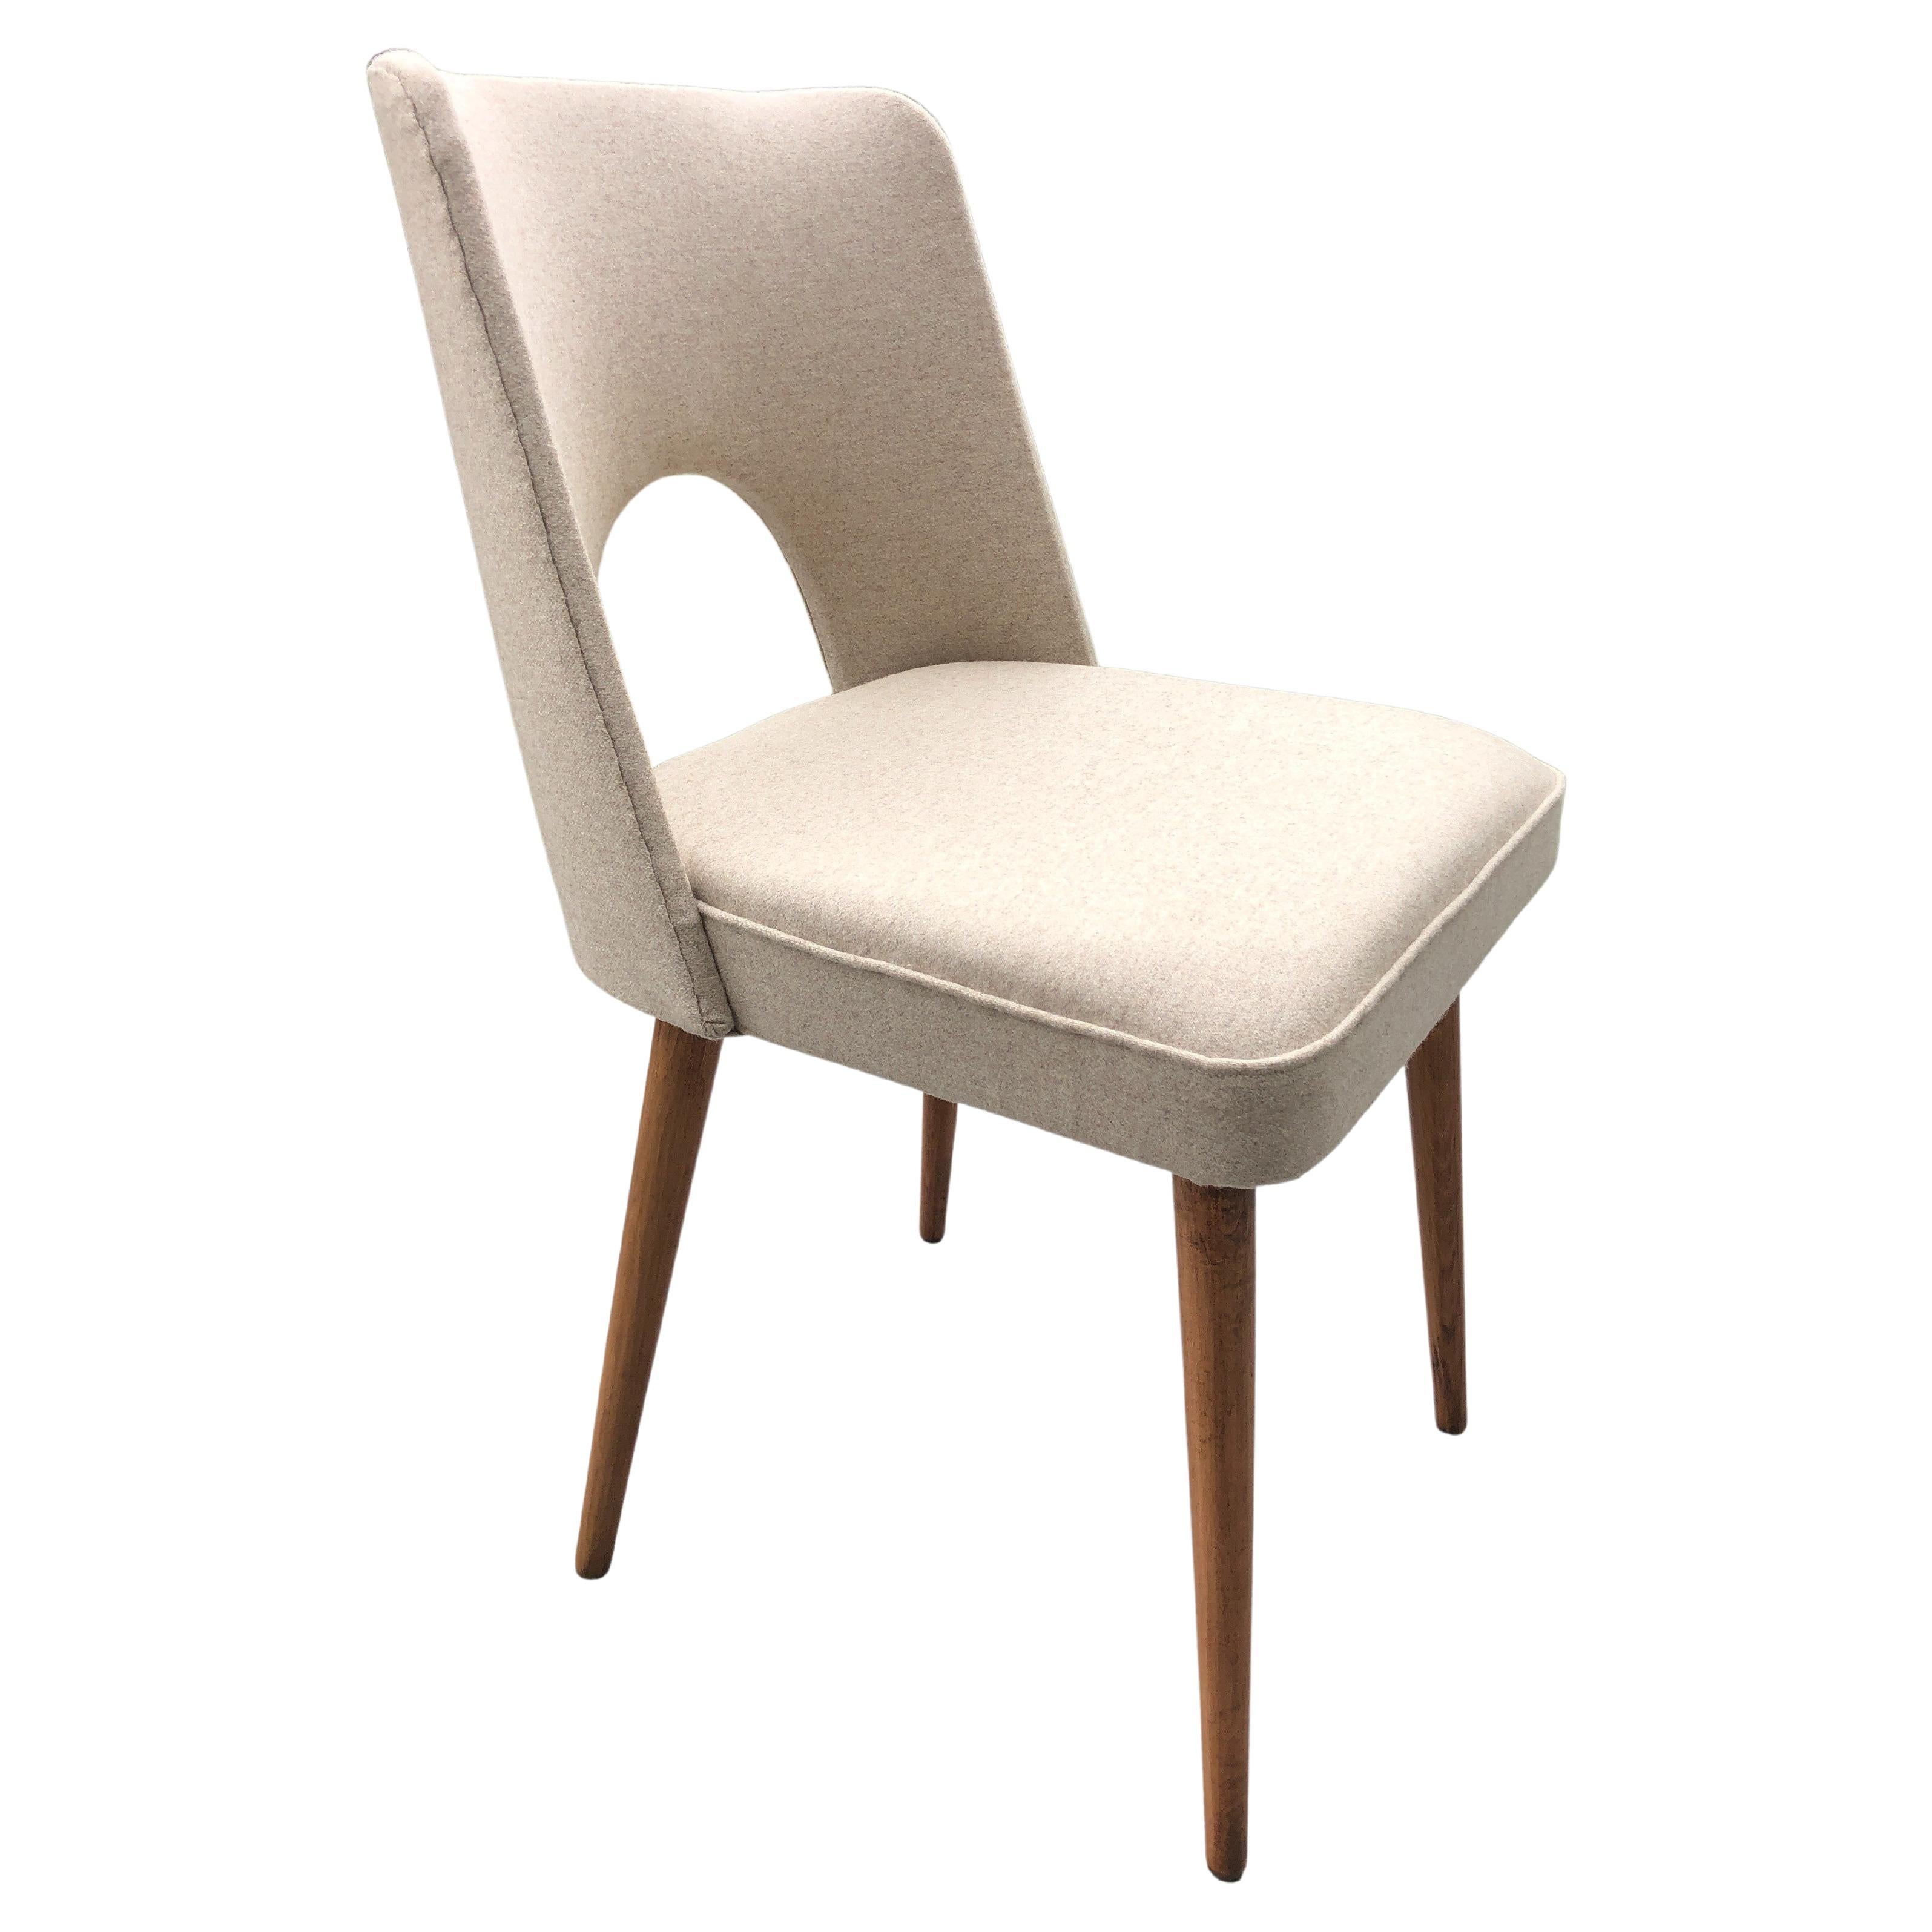 Beige Wool Shell Dining Chair by Lesniewski, 1960s For Sale